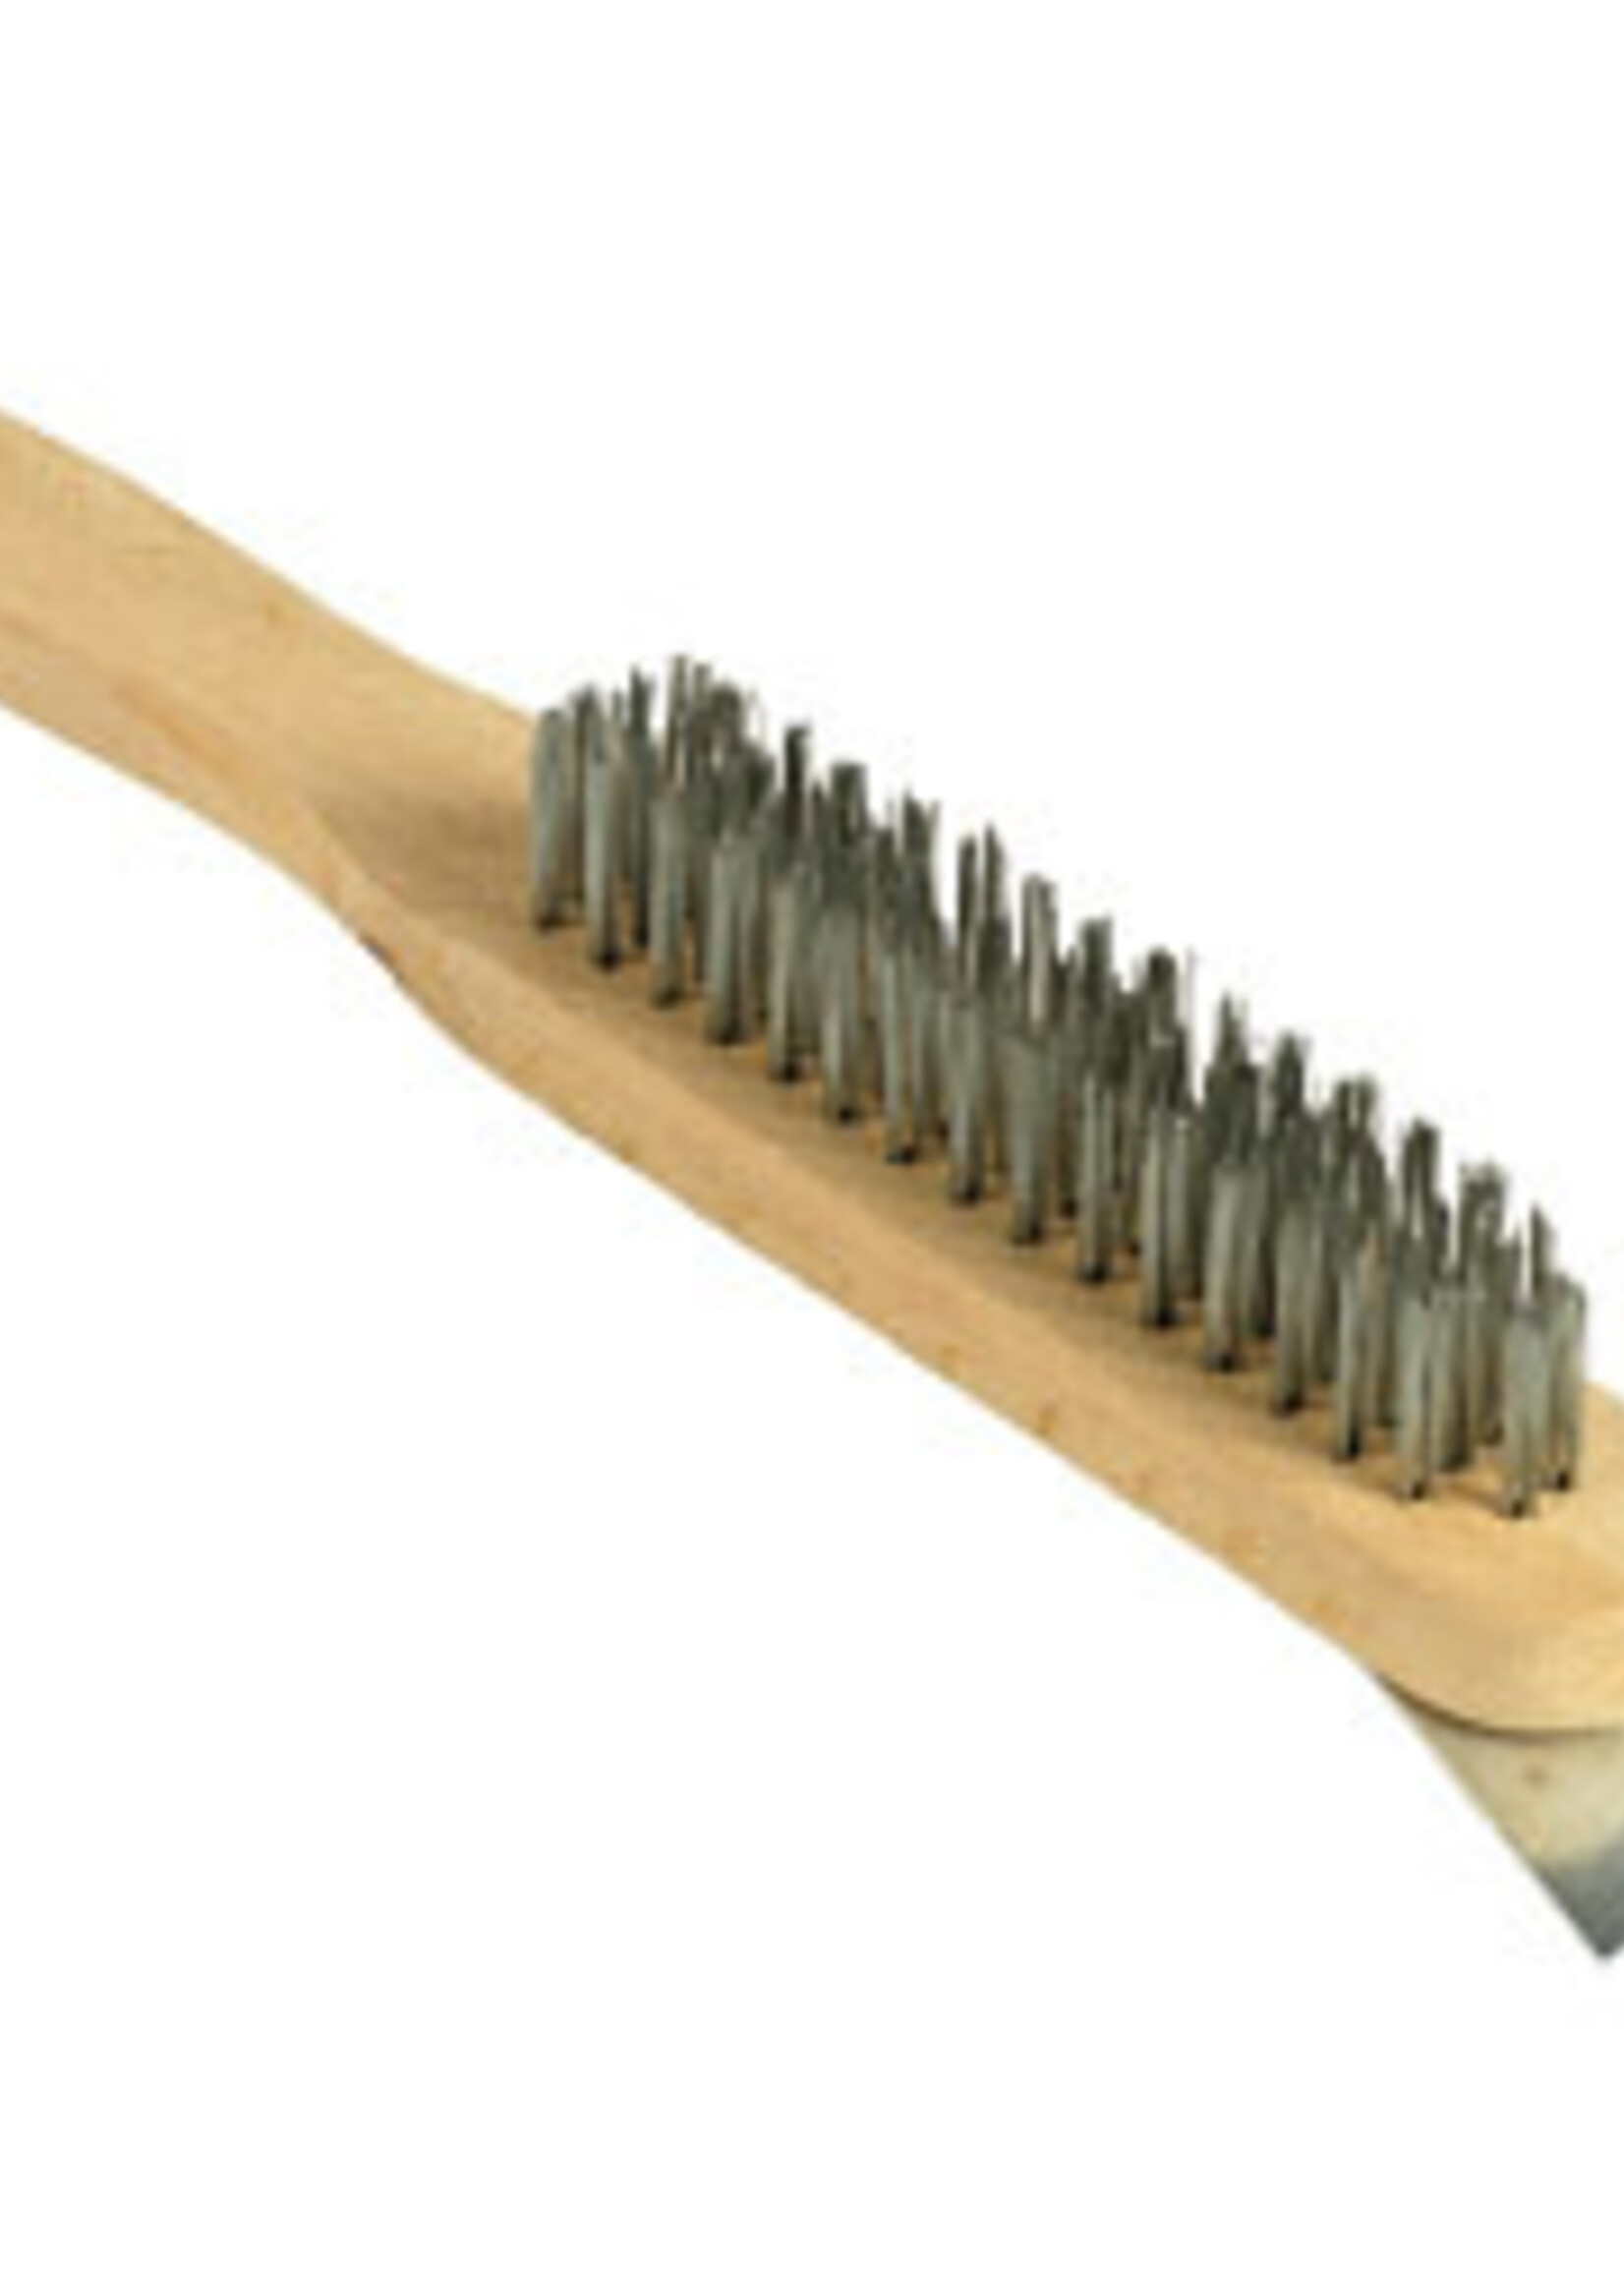 SupaTool SupaTool Wooden Handle Wire Brush 4 Row with Scraper